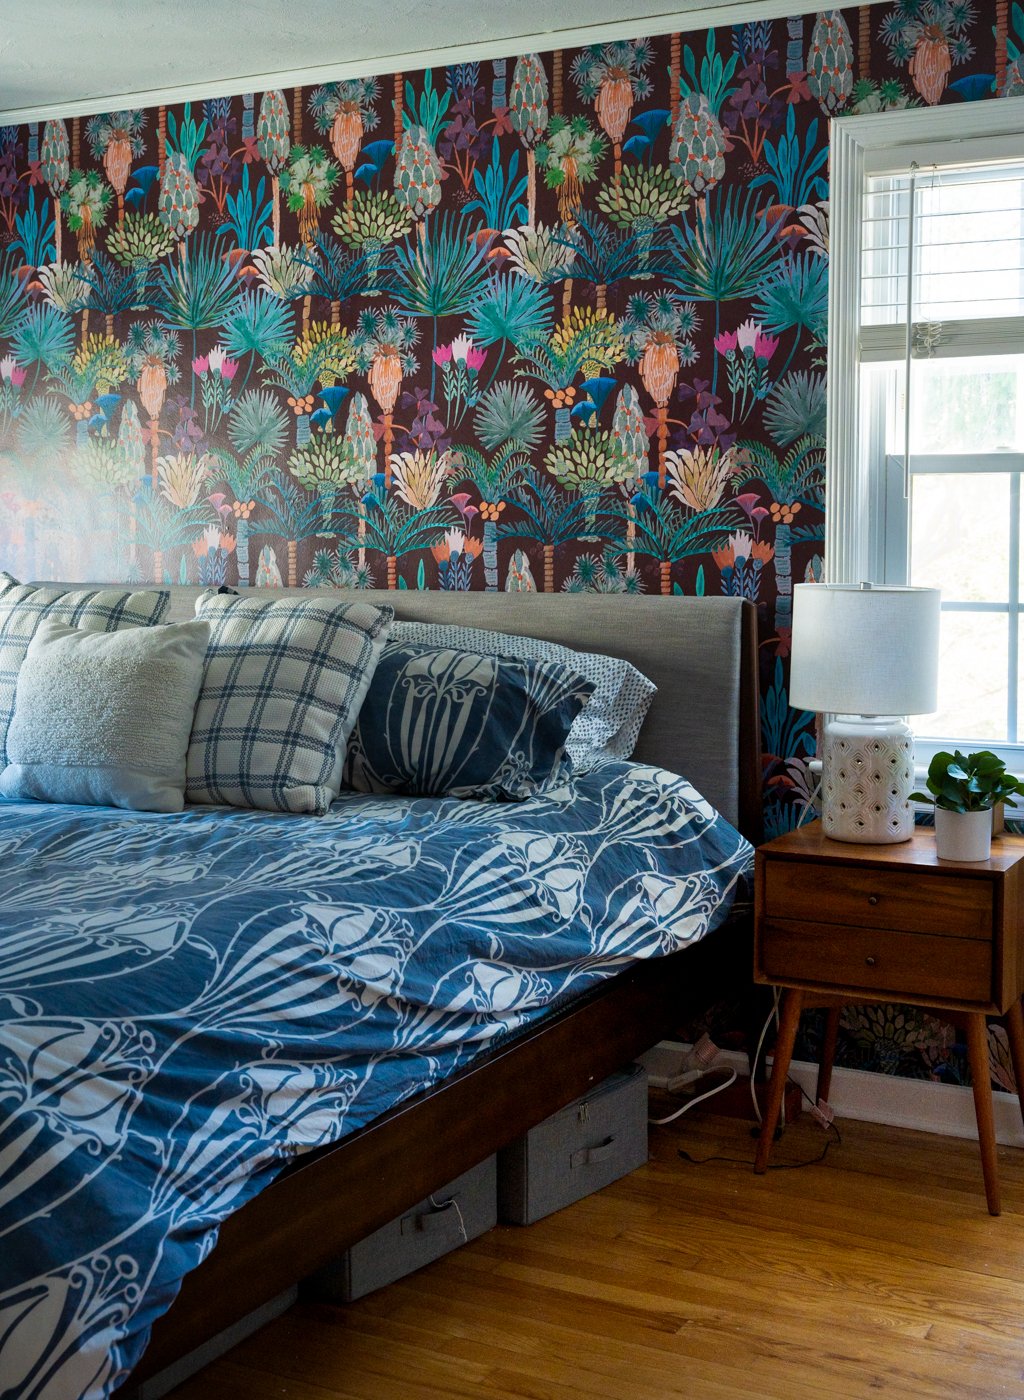 PRIMARY BED 566 Prospect art photos (Low res)-1.jpg